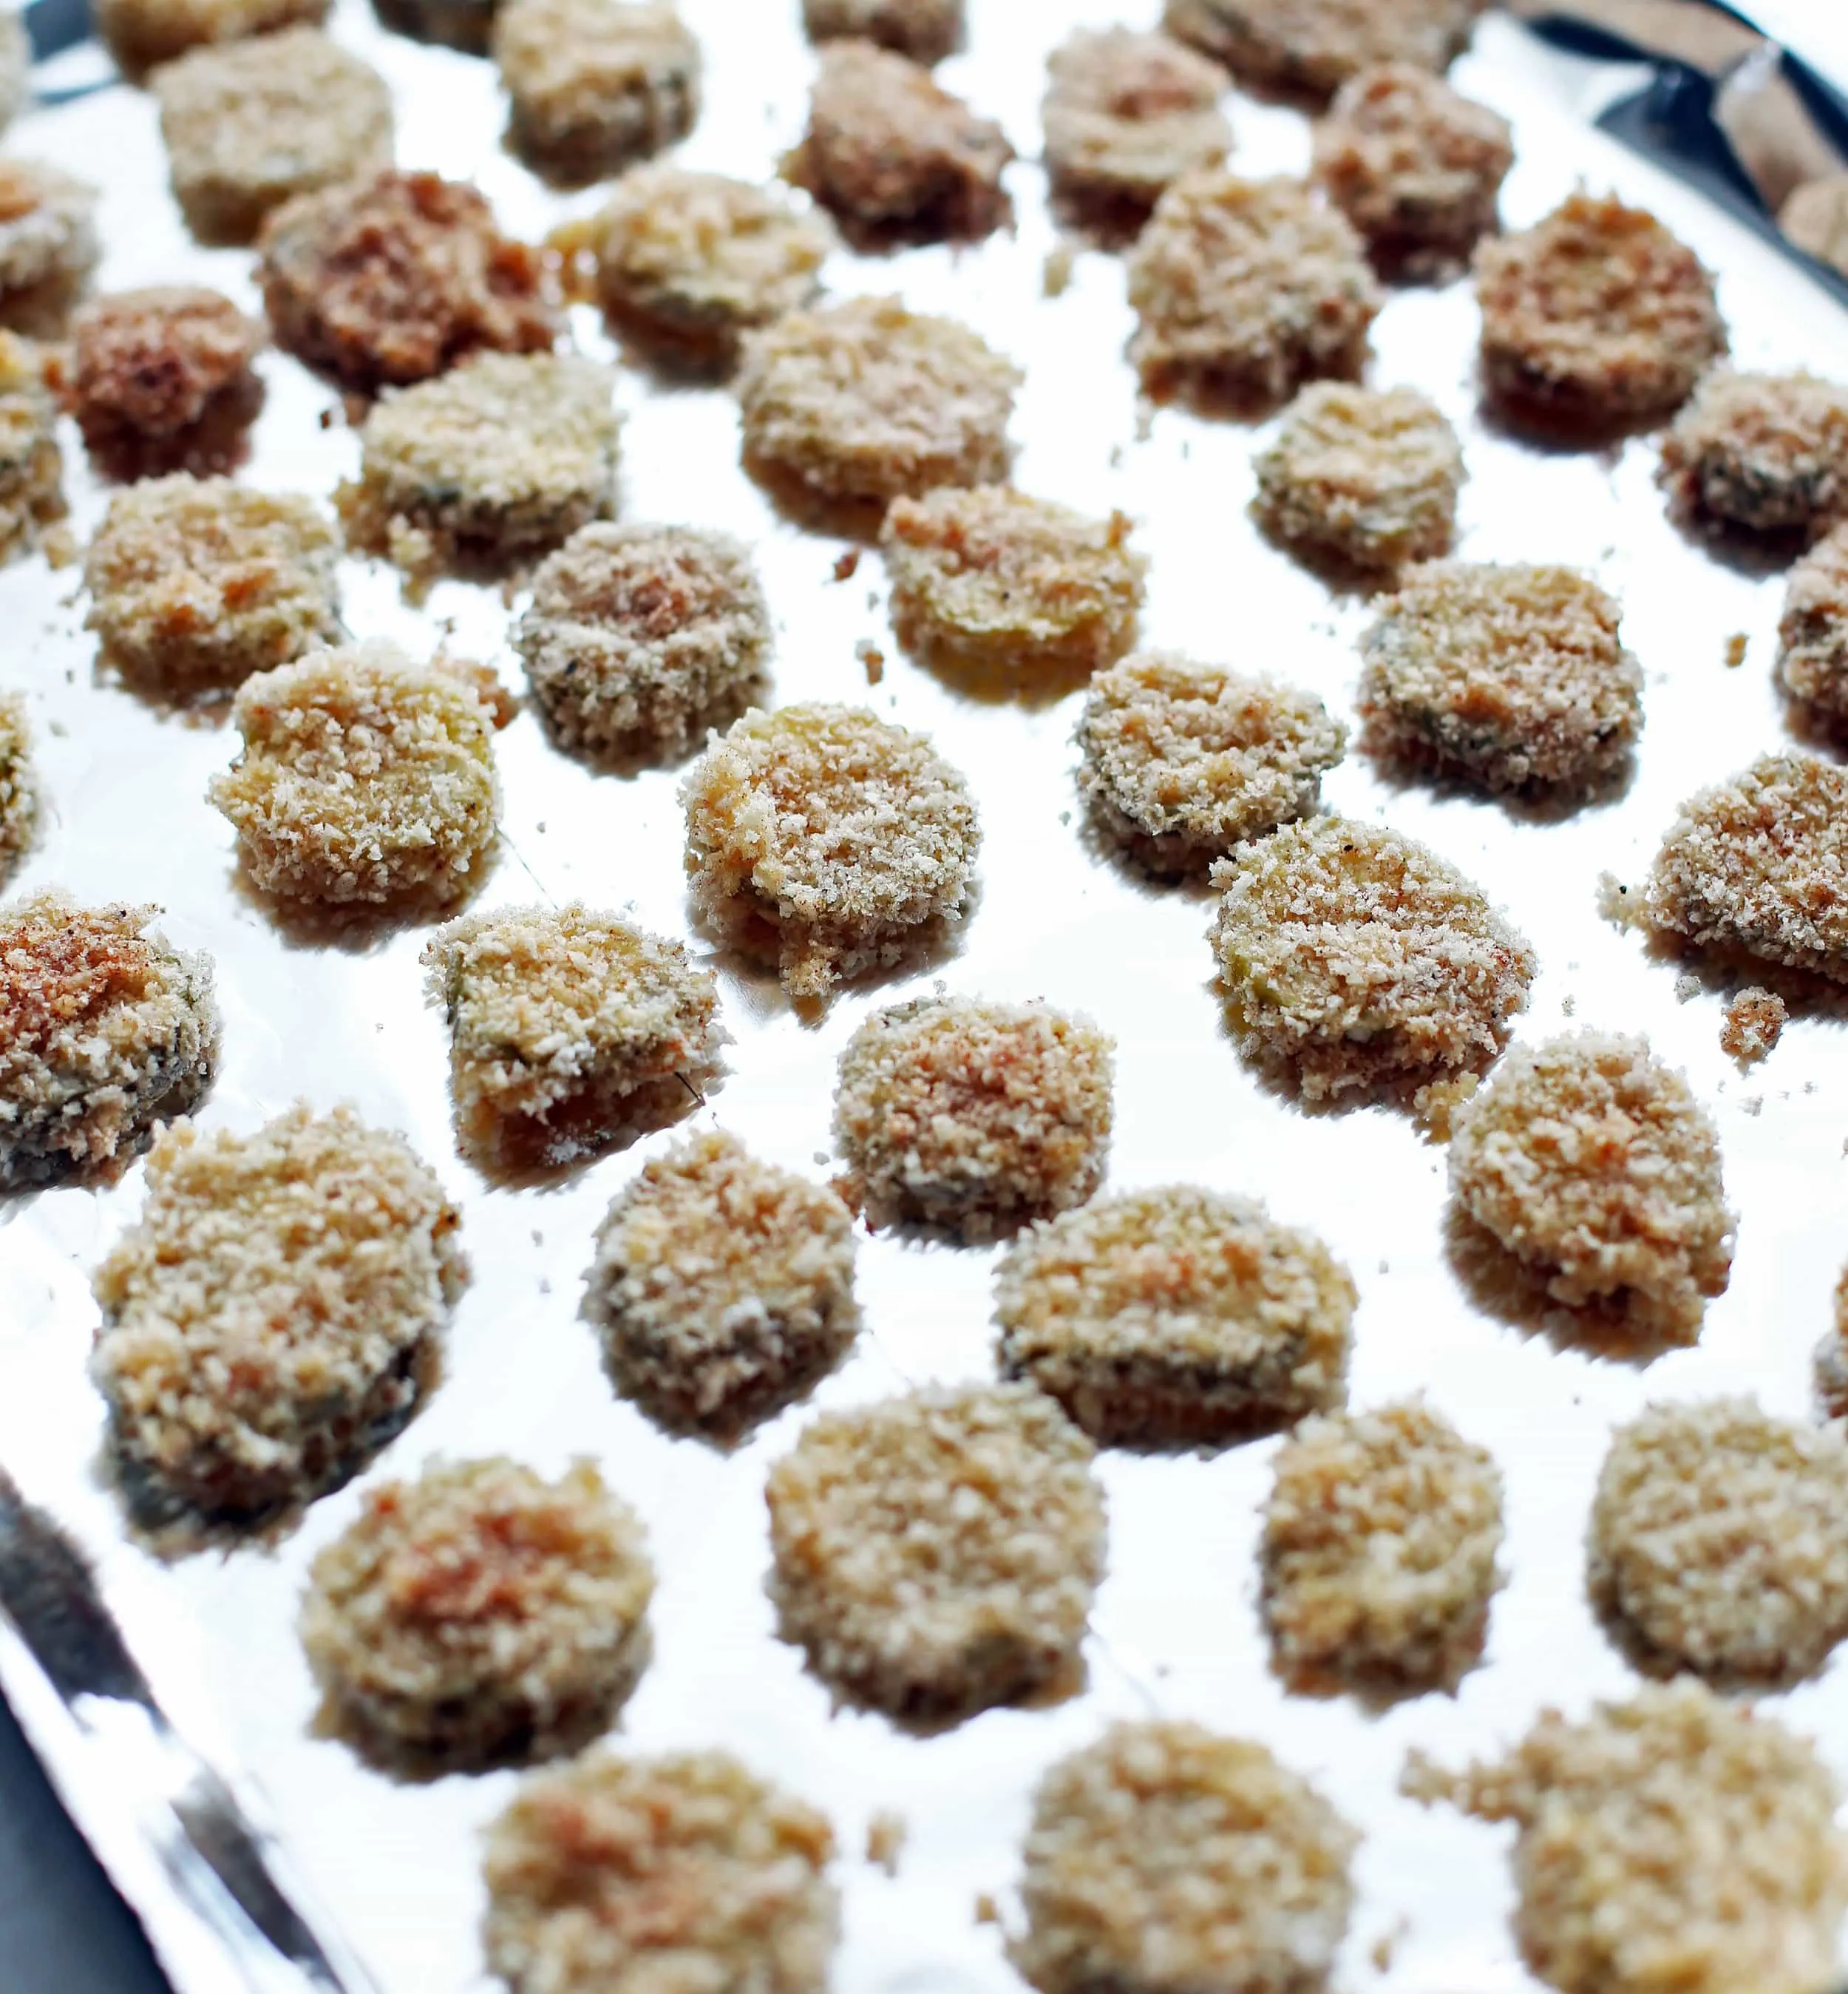 Dredged panko breadcrumb covered pickle slices placed on an aluminum foil lined baking sheet.